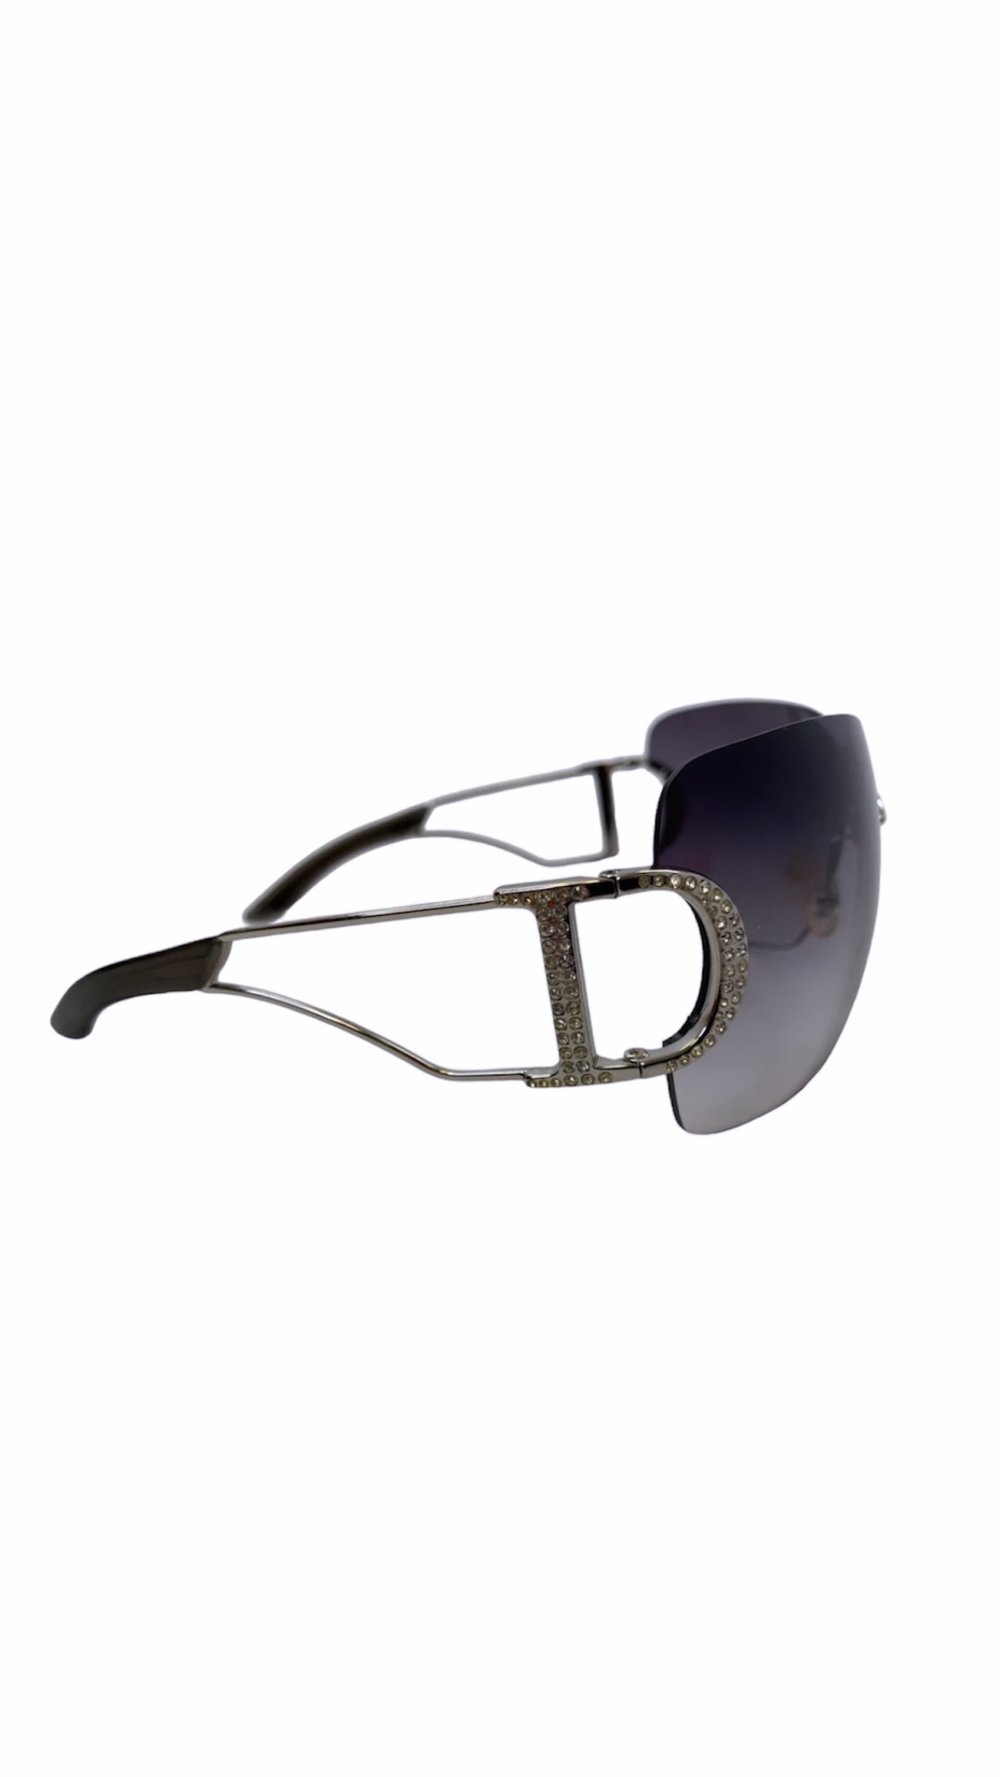 Image of VINTAGE DIOR DIORLY 1 SUNGLASSES 